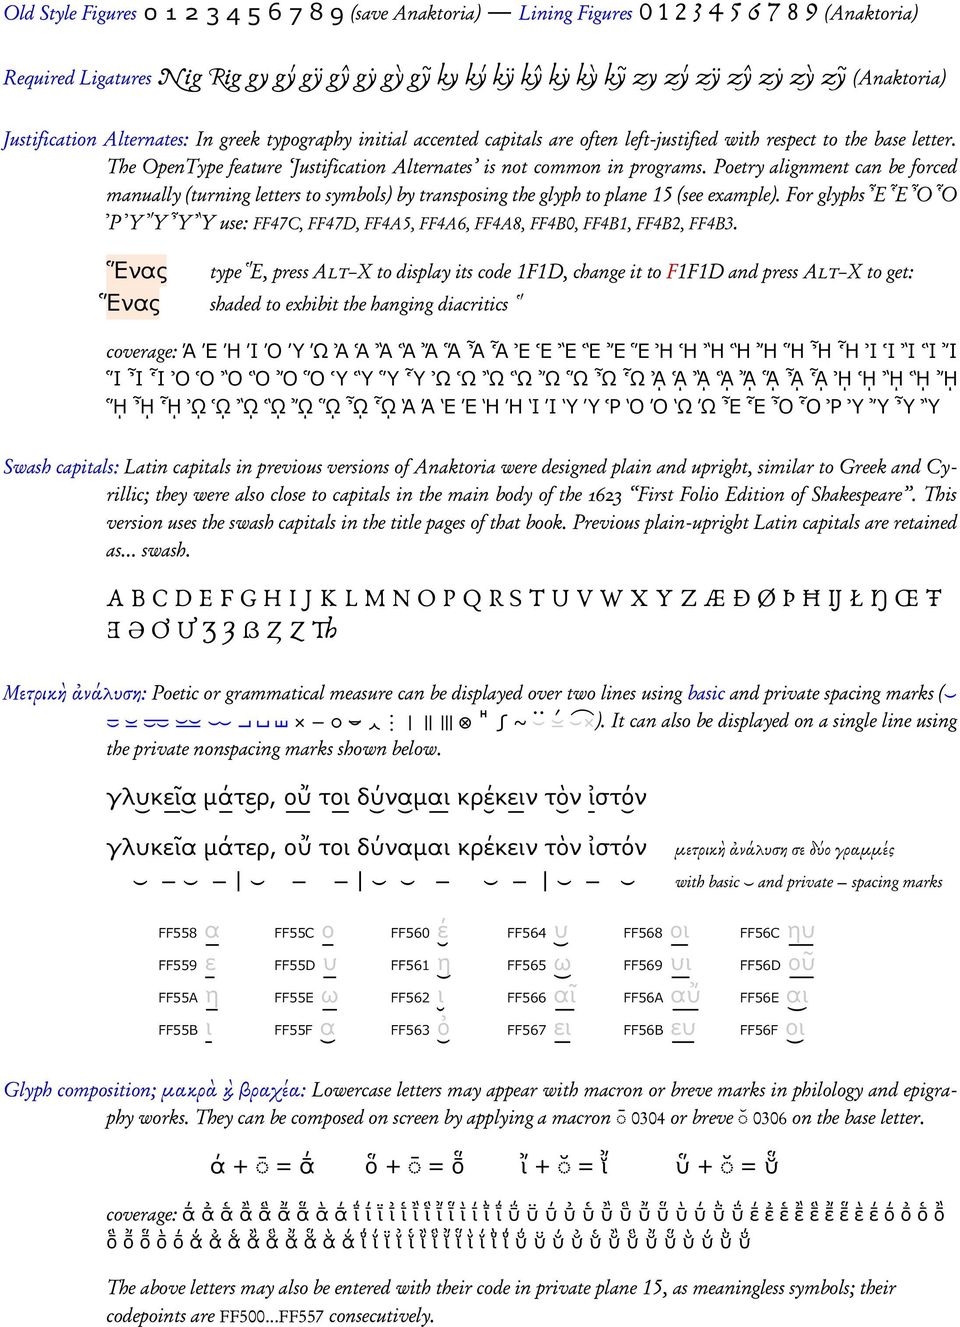 Poetry alignment can be forced manually (turning letters to symbols) by transposing the glyph to plane 15 (see example). For glyphs use: FF47C, FF47D, FF4A5, FF4A6, FF4A8, FF4B0, FF4B1, FF4B2, FF4B3.